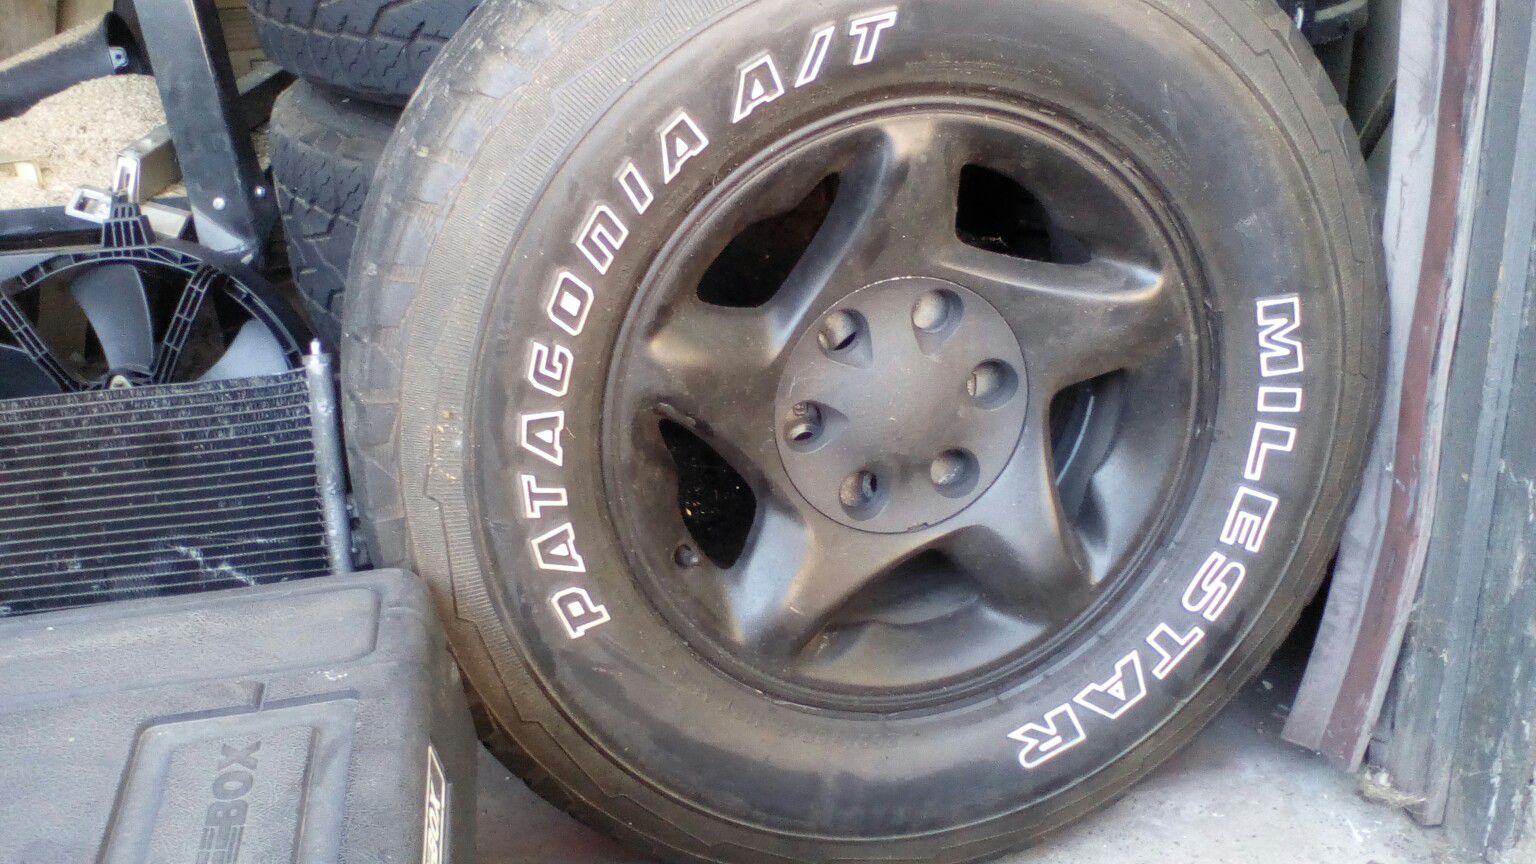 Toyota Tacoma 265/70/16 rims and tires